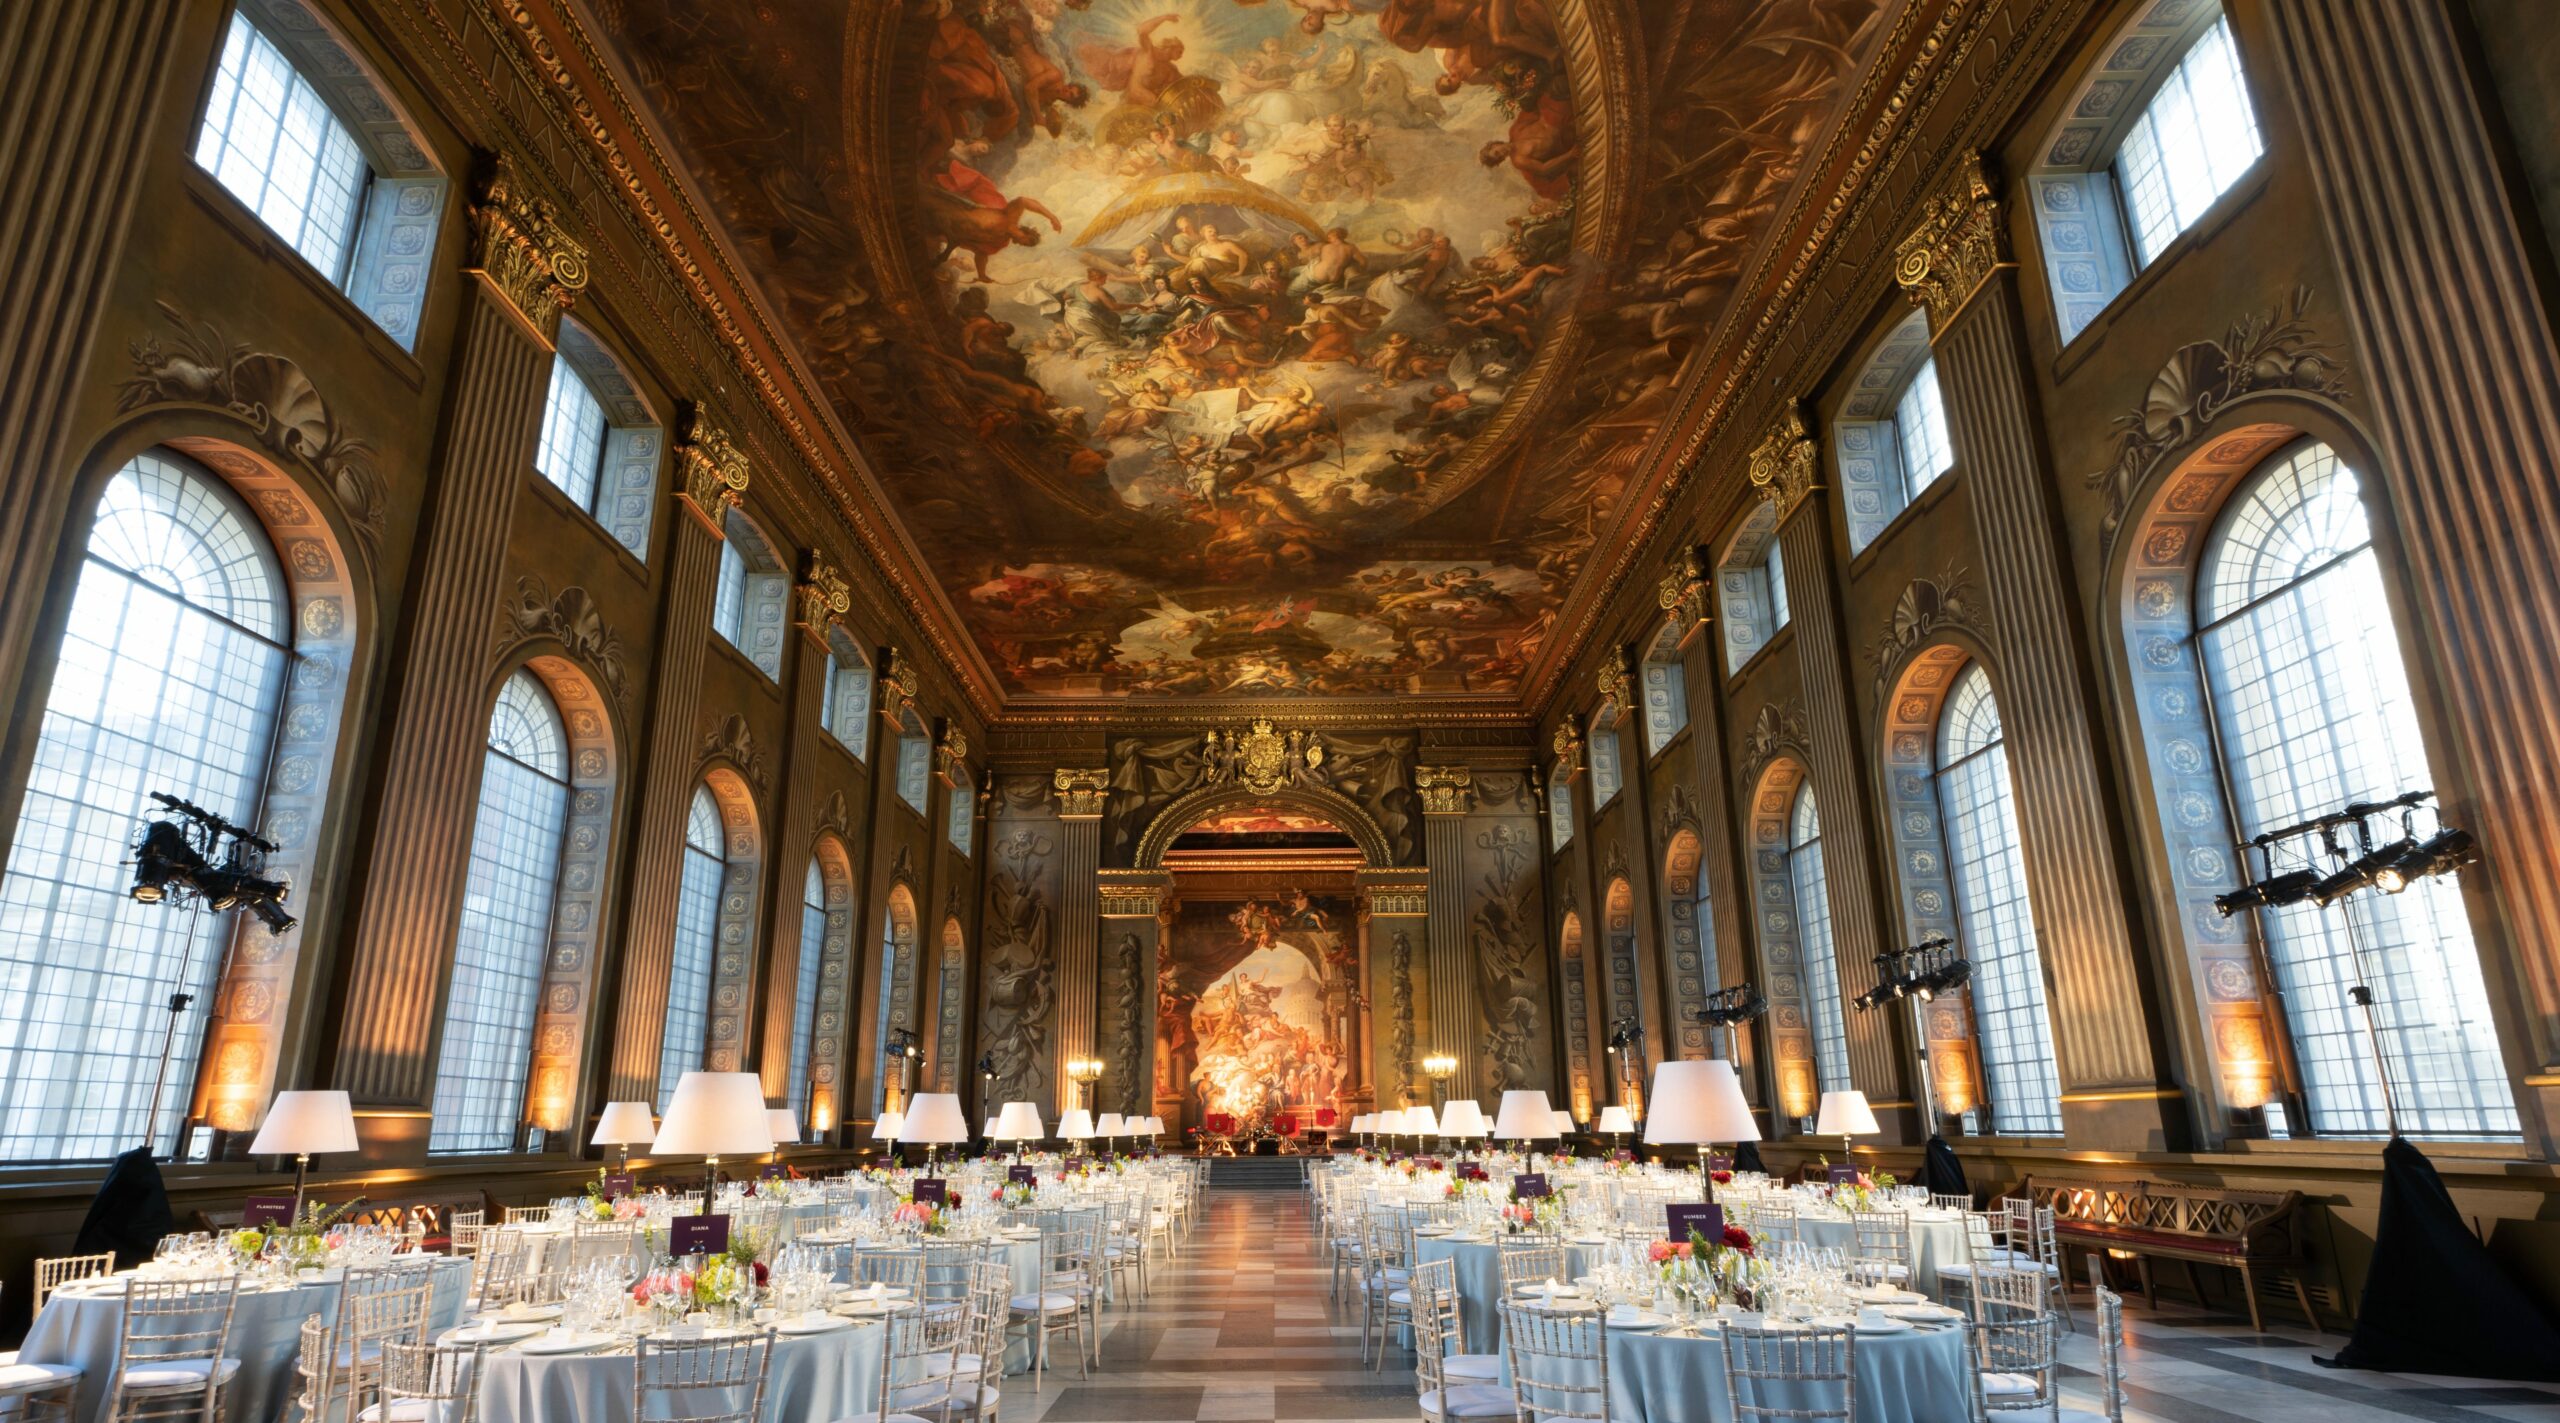 Painted-Hall-Gala-Dinner-11-scaled-aspect-ratio-9-5